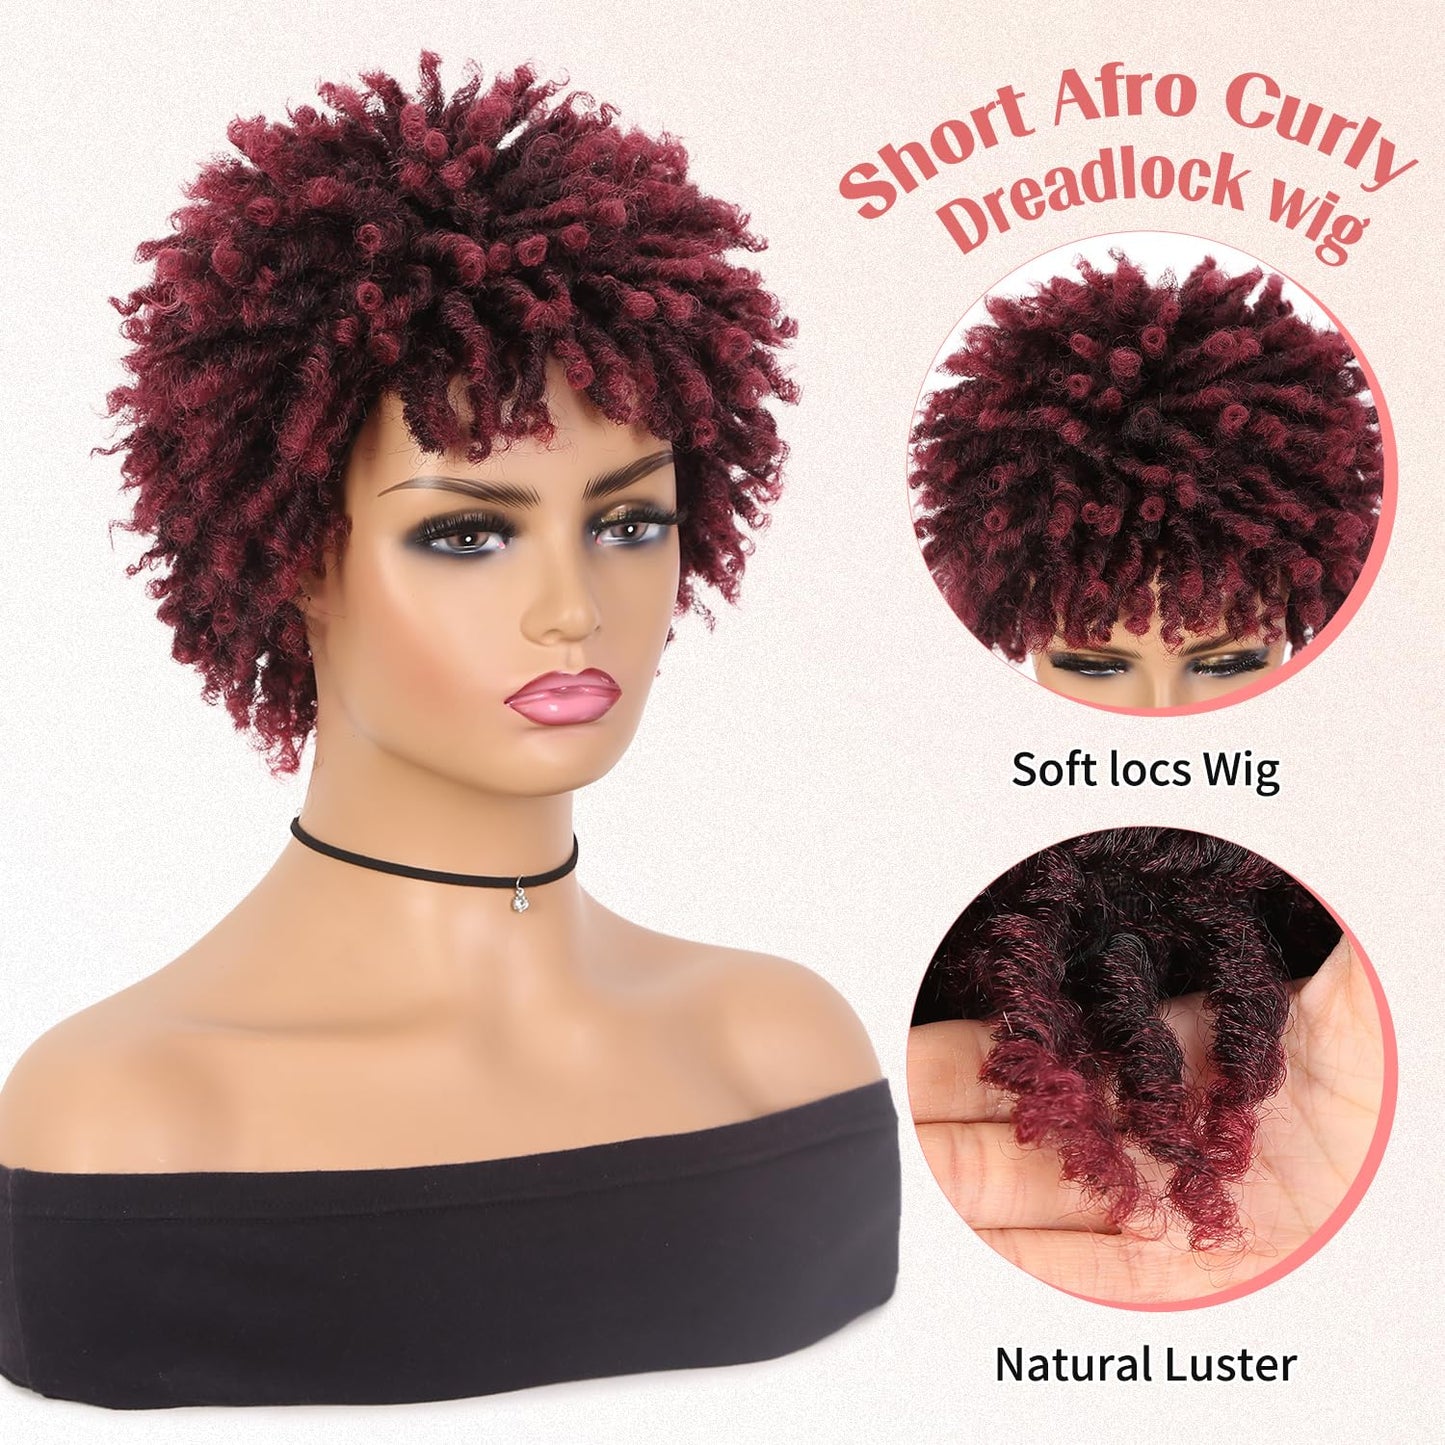 Faux Locs Braid Wigs for Women and Men Short Afro Locs Dreadlock Wig Twist Braided Dreads Wig Natural Curly Synthetic Wig